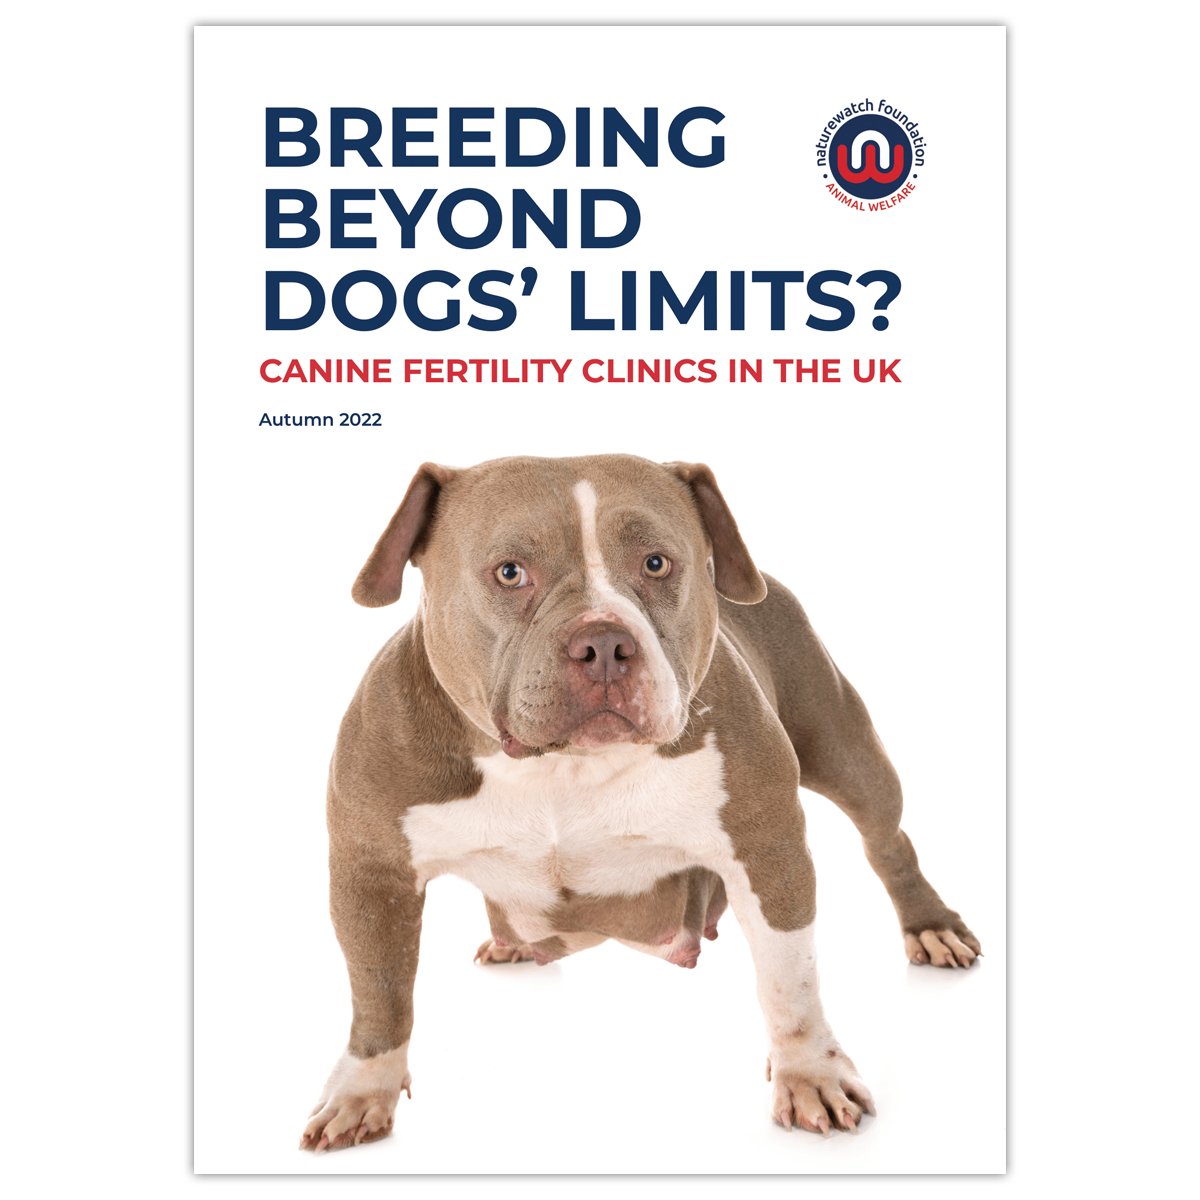 🩺 98% of veterinary professionals told us they’re concerned about #CanineFertilityClinics. 🐾

Find out why in our report:
naturewatch.org/wp-content/upl…

Don’t have much time? Read our at-a-glance version:
naturewatch.org/wp-content/upl…